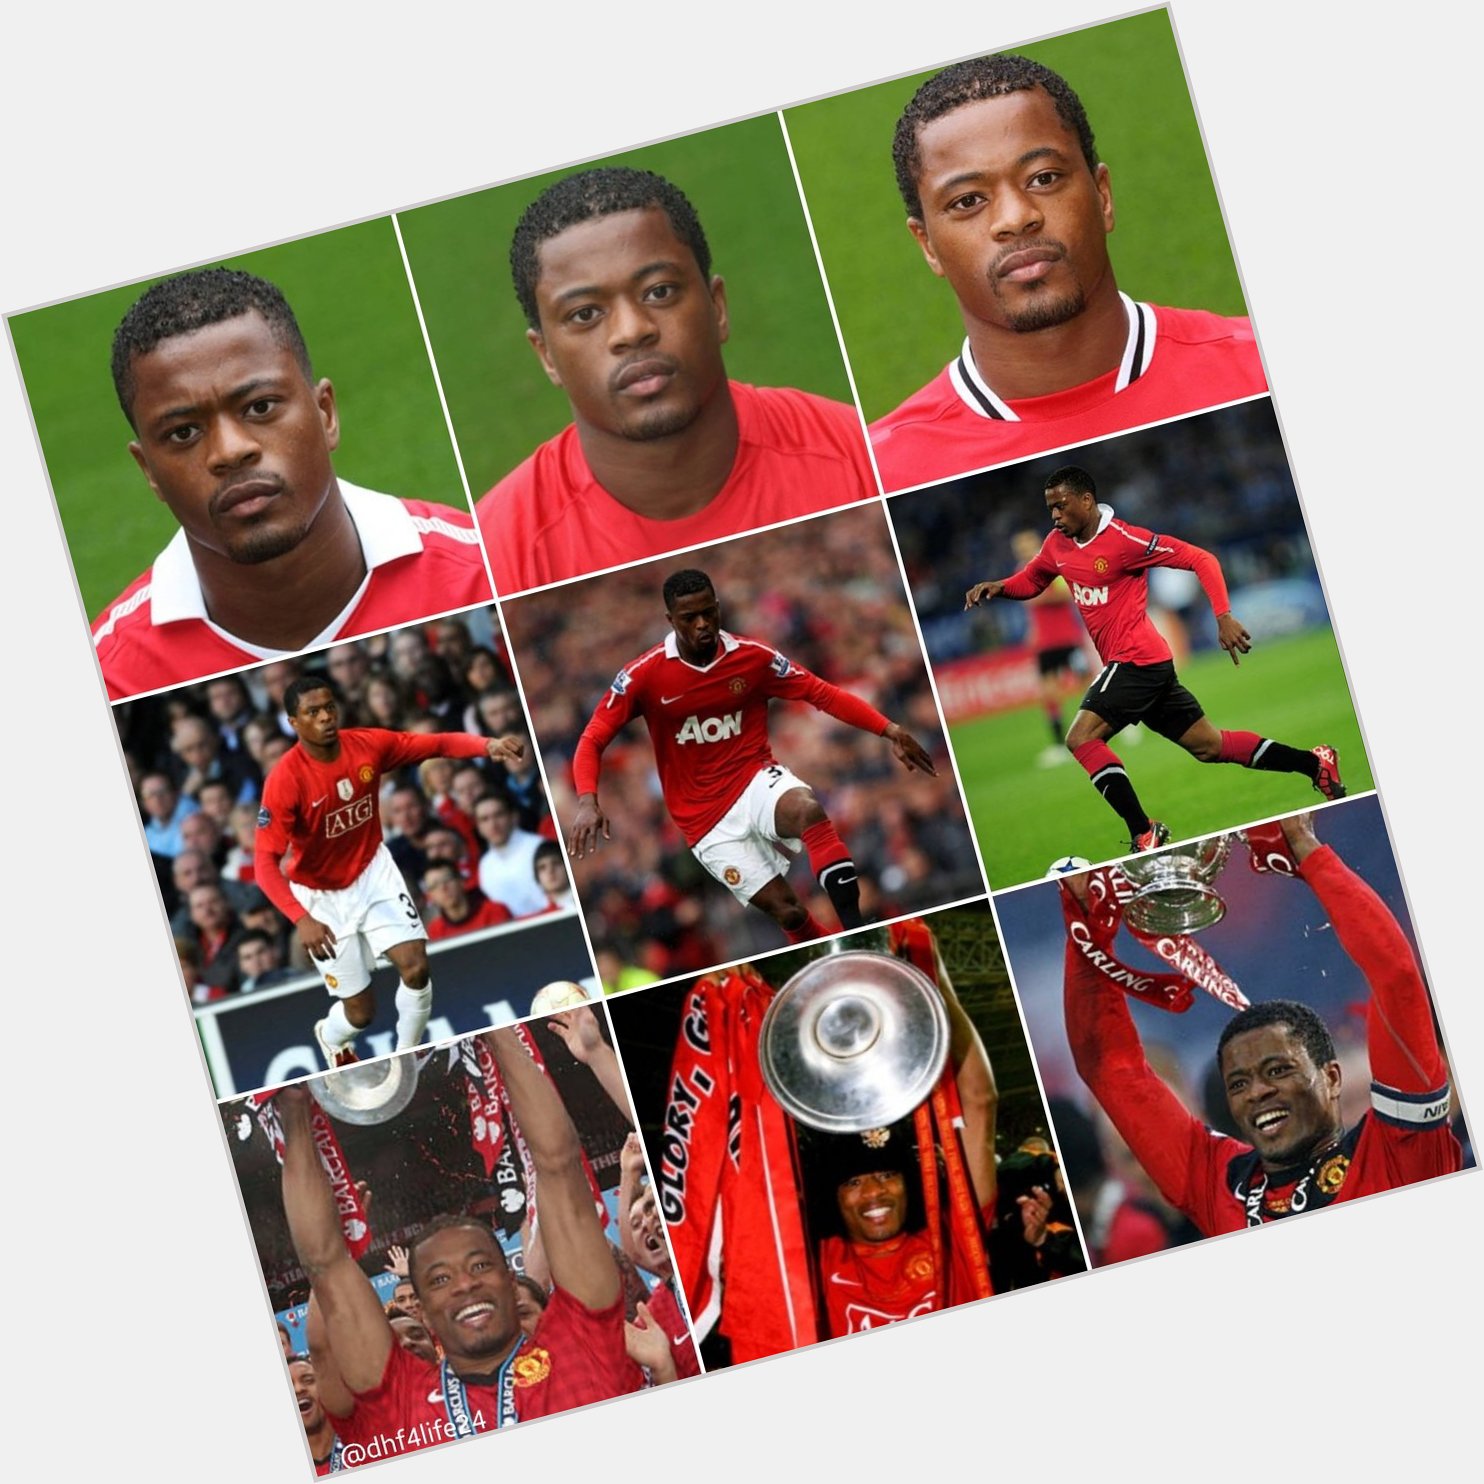 Happy 41st Birthday   on 15th May 2022 to Patrice Evra - What a Player and LEGEND... 